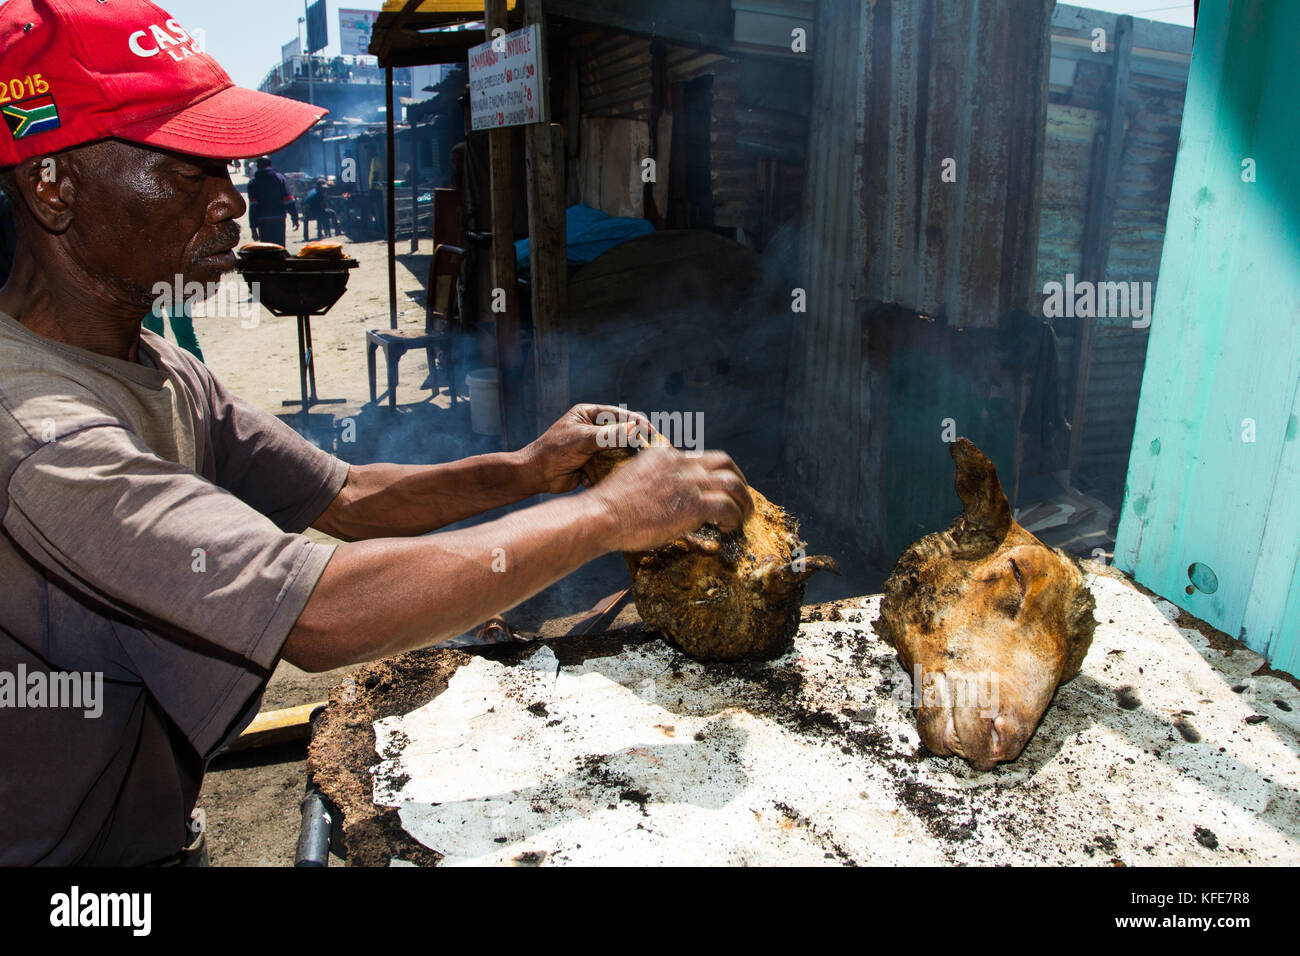 Street vendor cooking 'smiley' sheep head in Khayelitsha township, Cape Town, South Africa Stock Photo